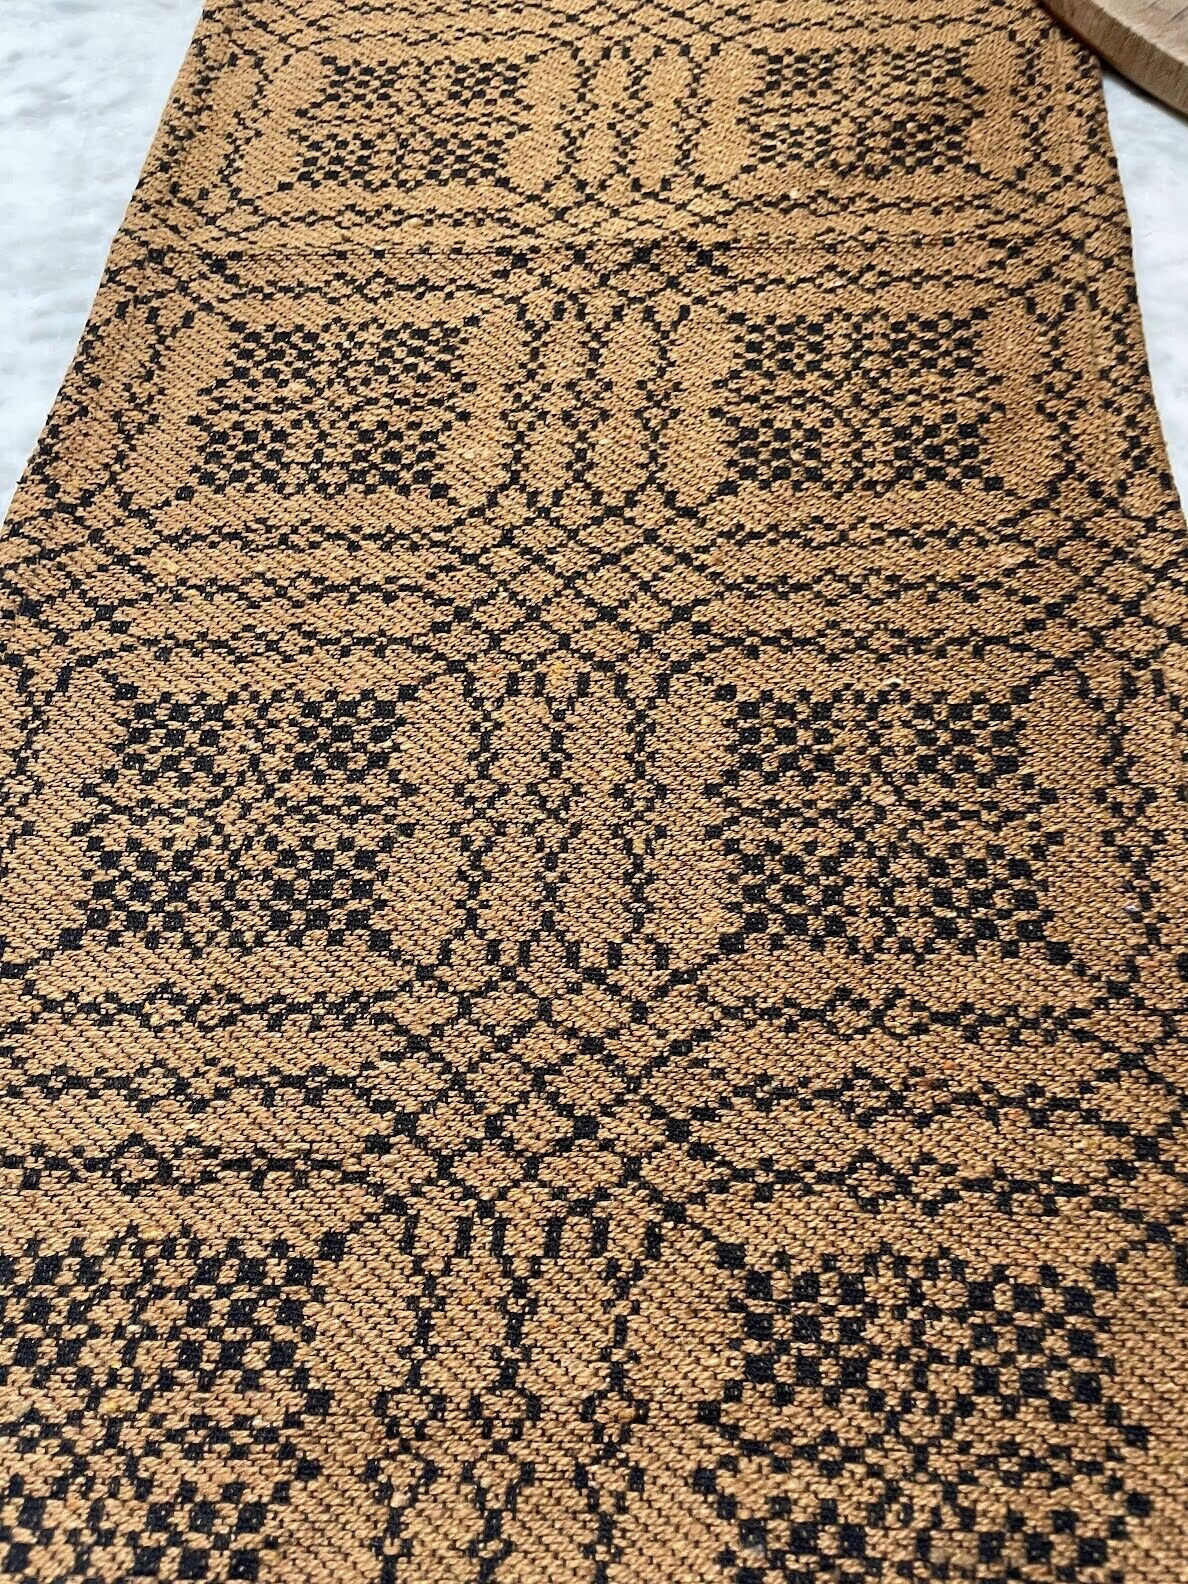 Primitive Farmhouse Nantucket Mustard and Black 34&quot; Table Square - The Primitive Pineapple Collection